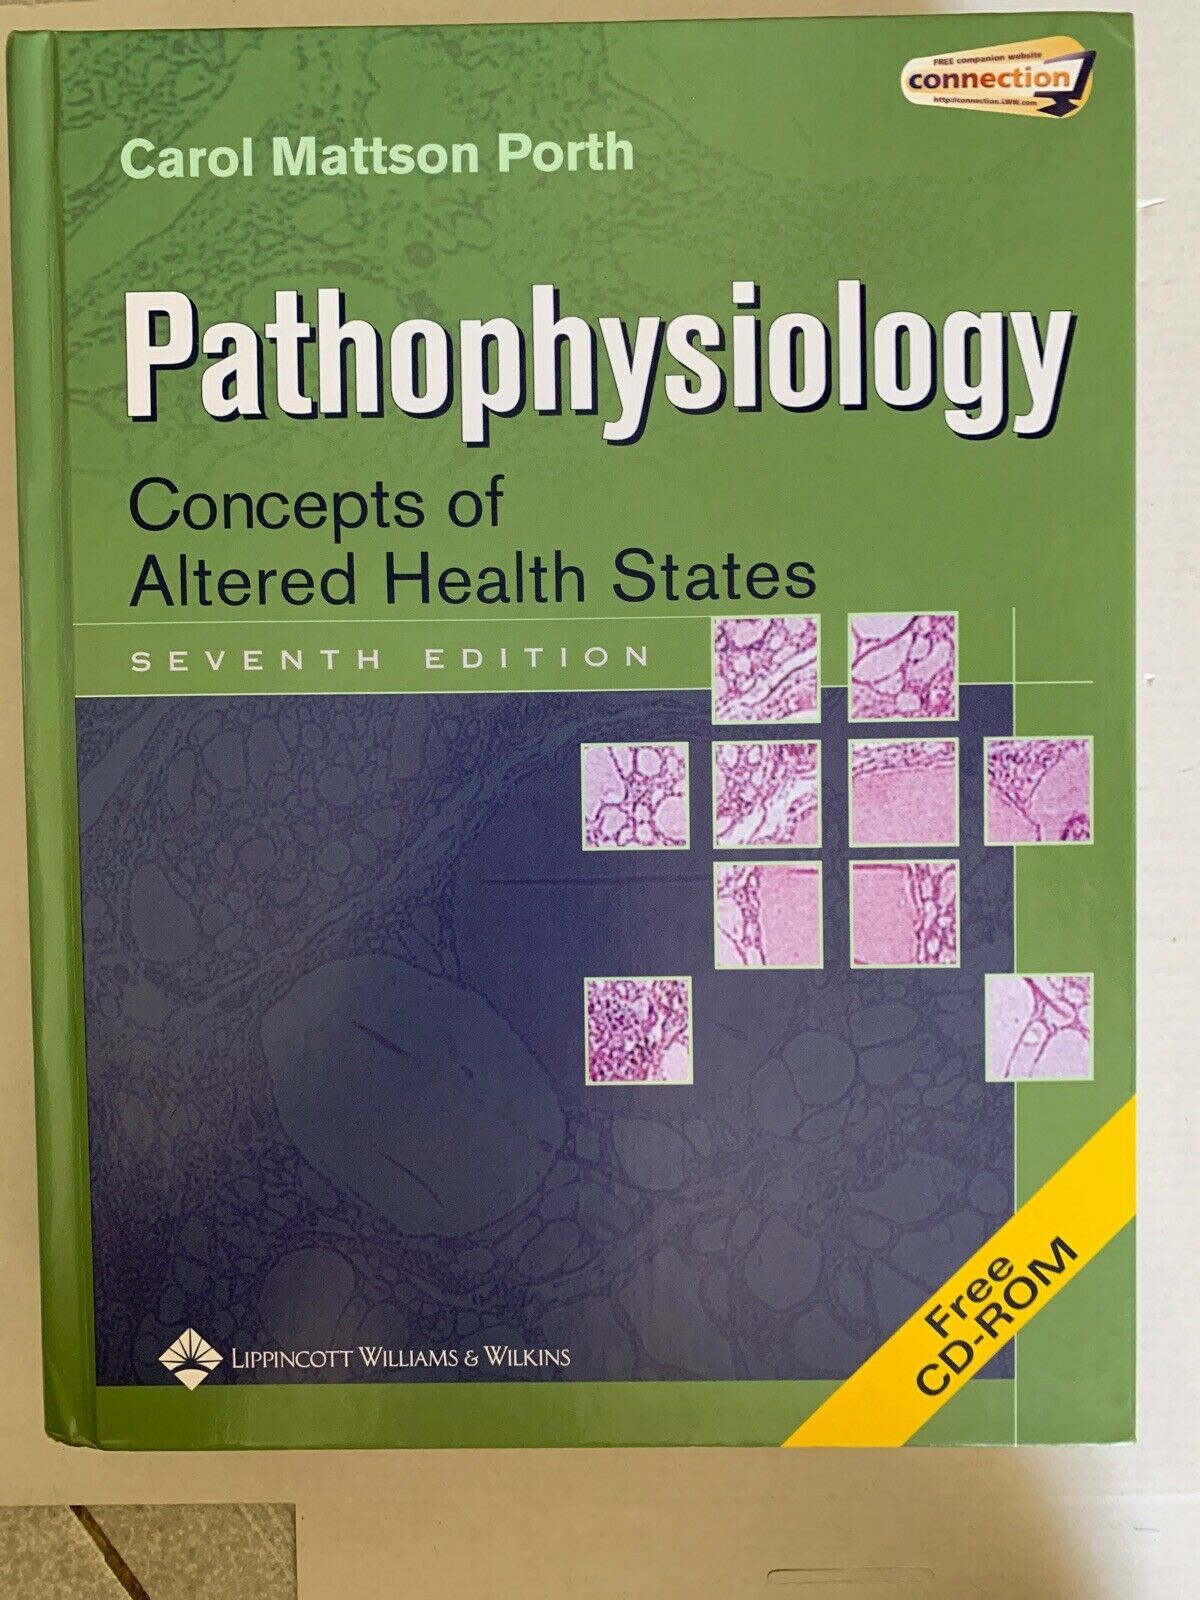 Pathophysiology : Concepts of Altered Health States by Carol Mattson Porth...